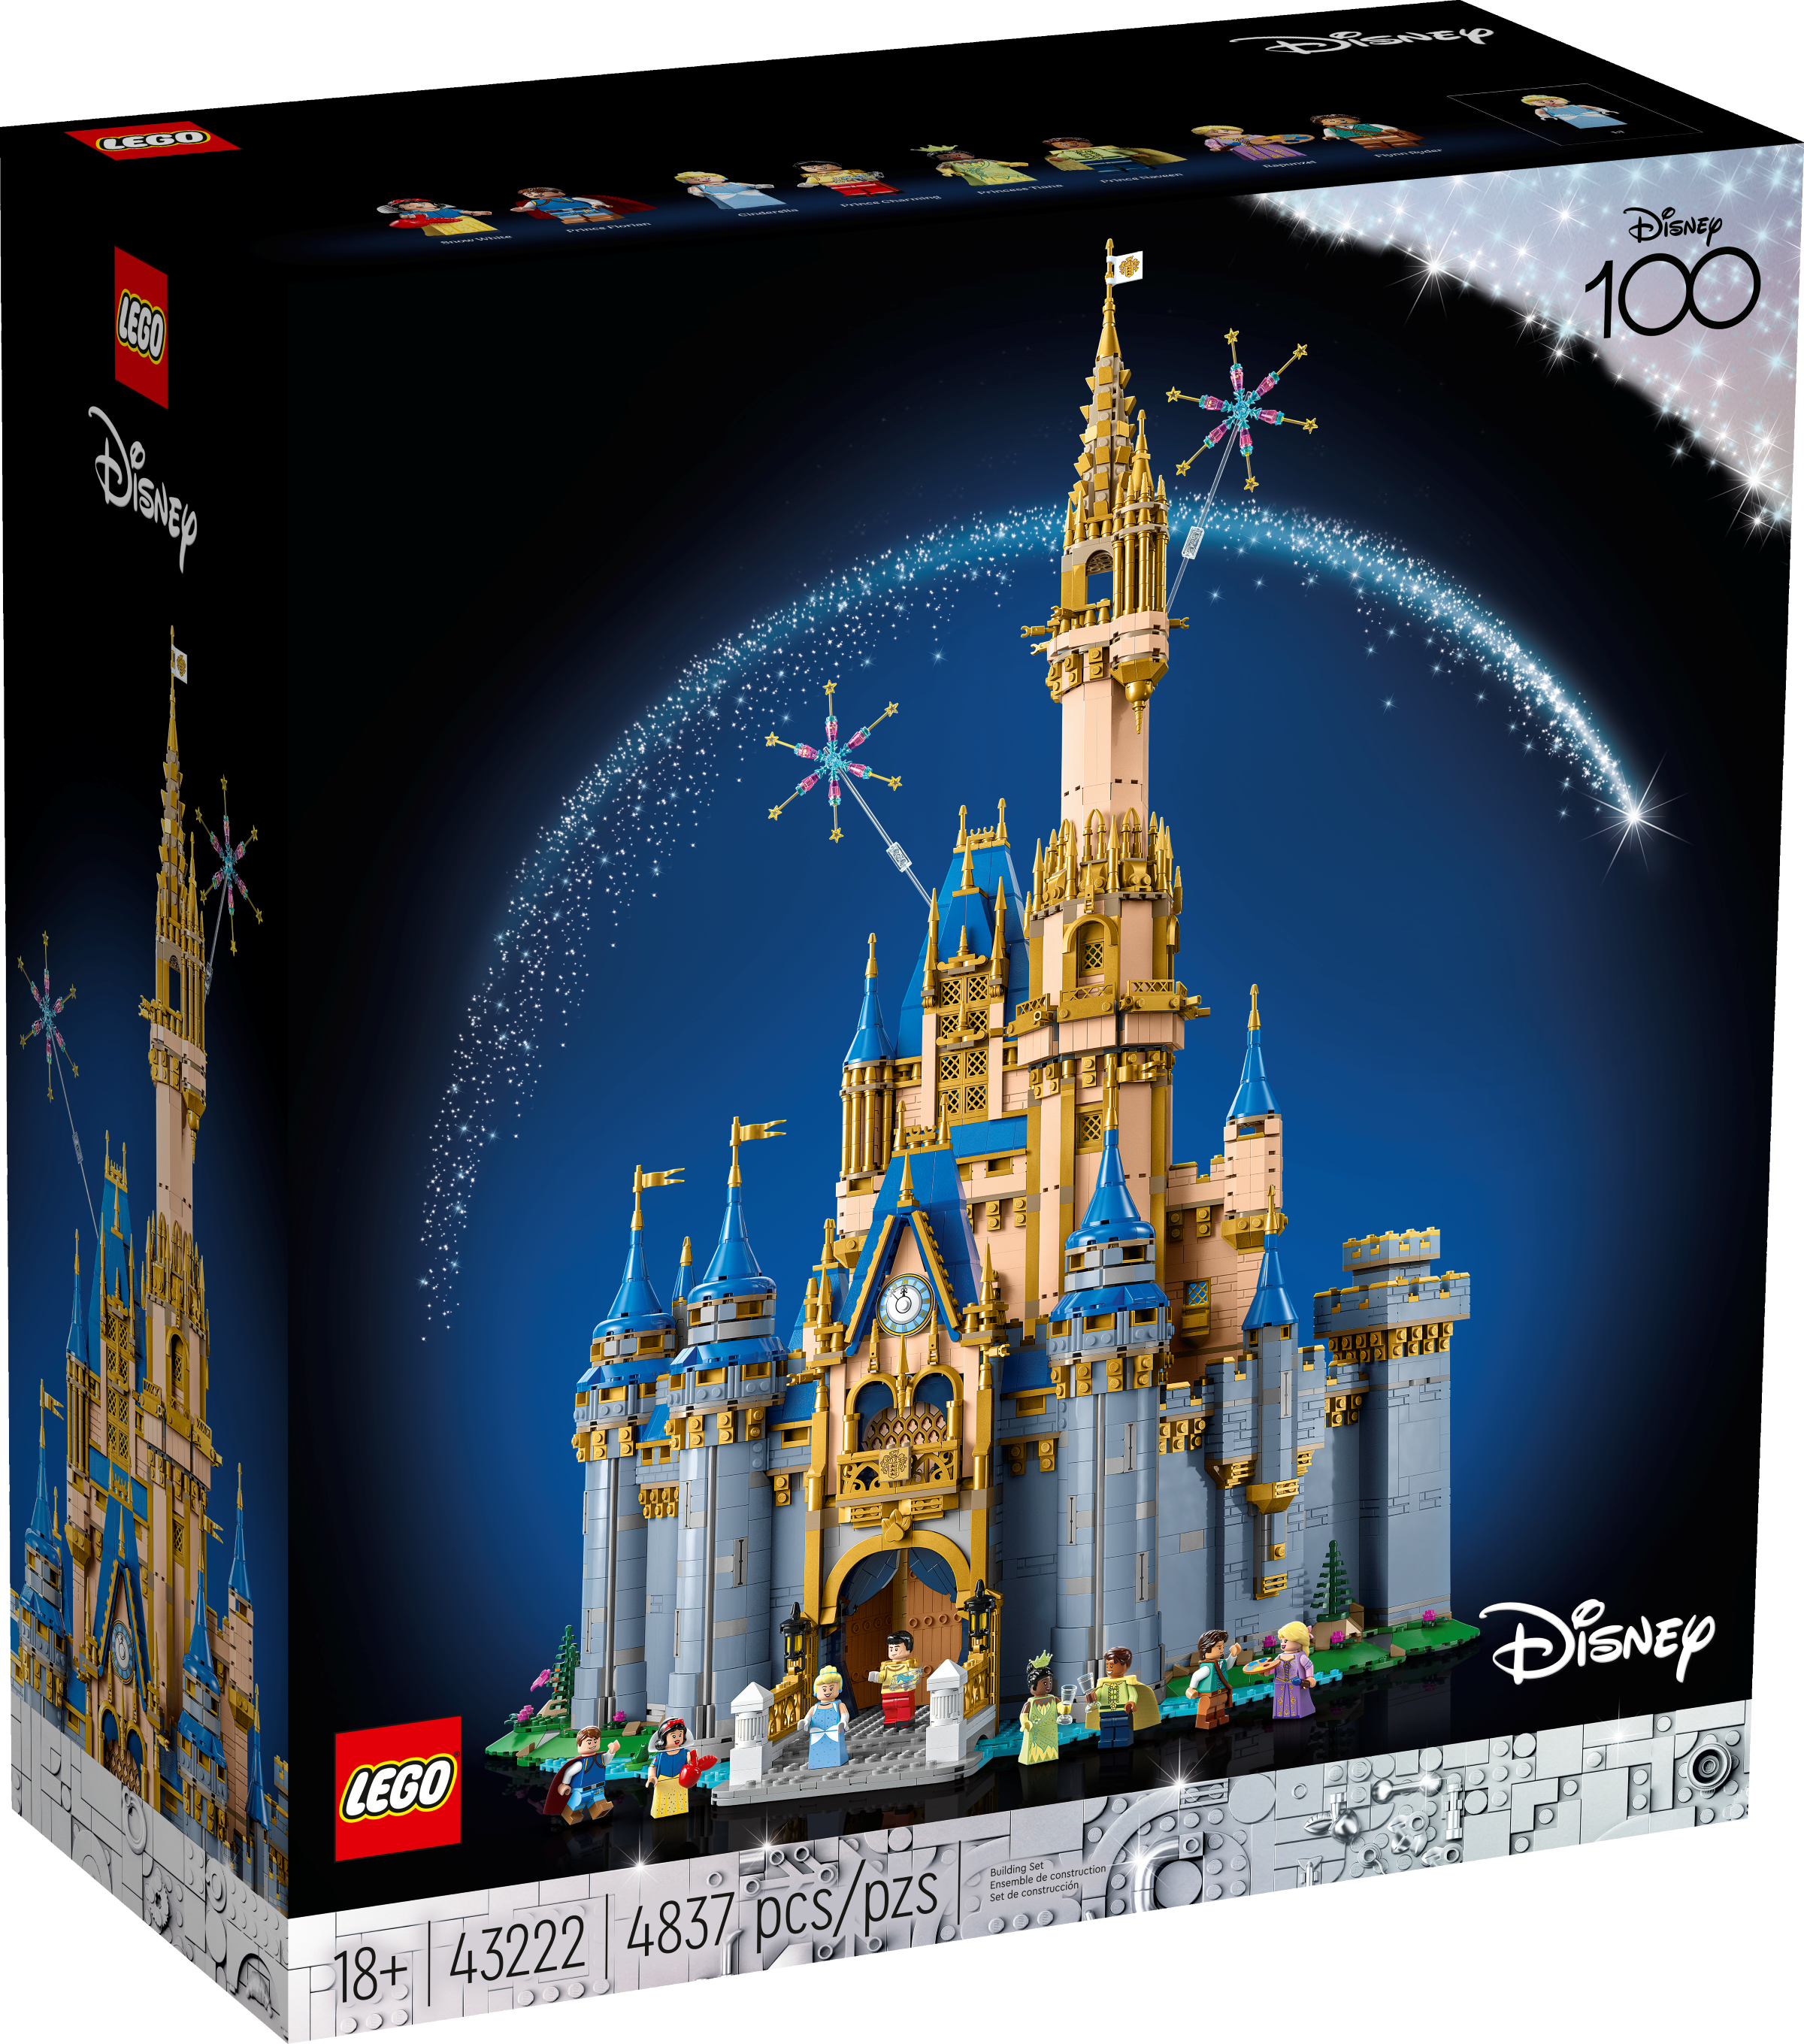 New Disney100 LEGO Sets Inspired by Animation Icons, Villains, and Disney  Duos Coming Soon - Disneyland News Today